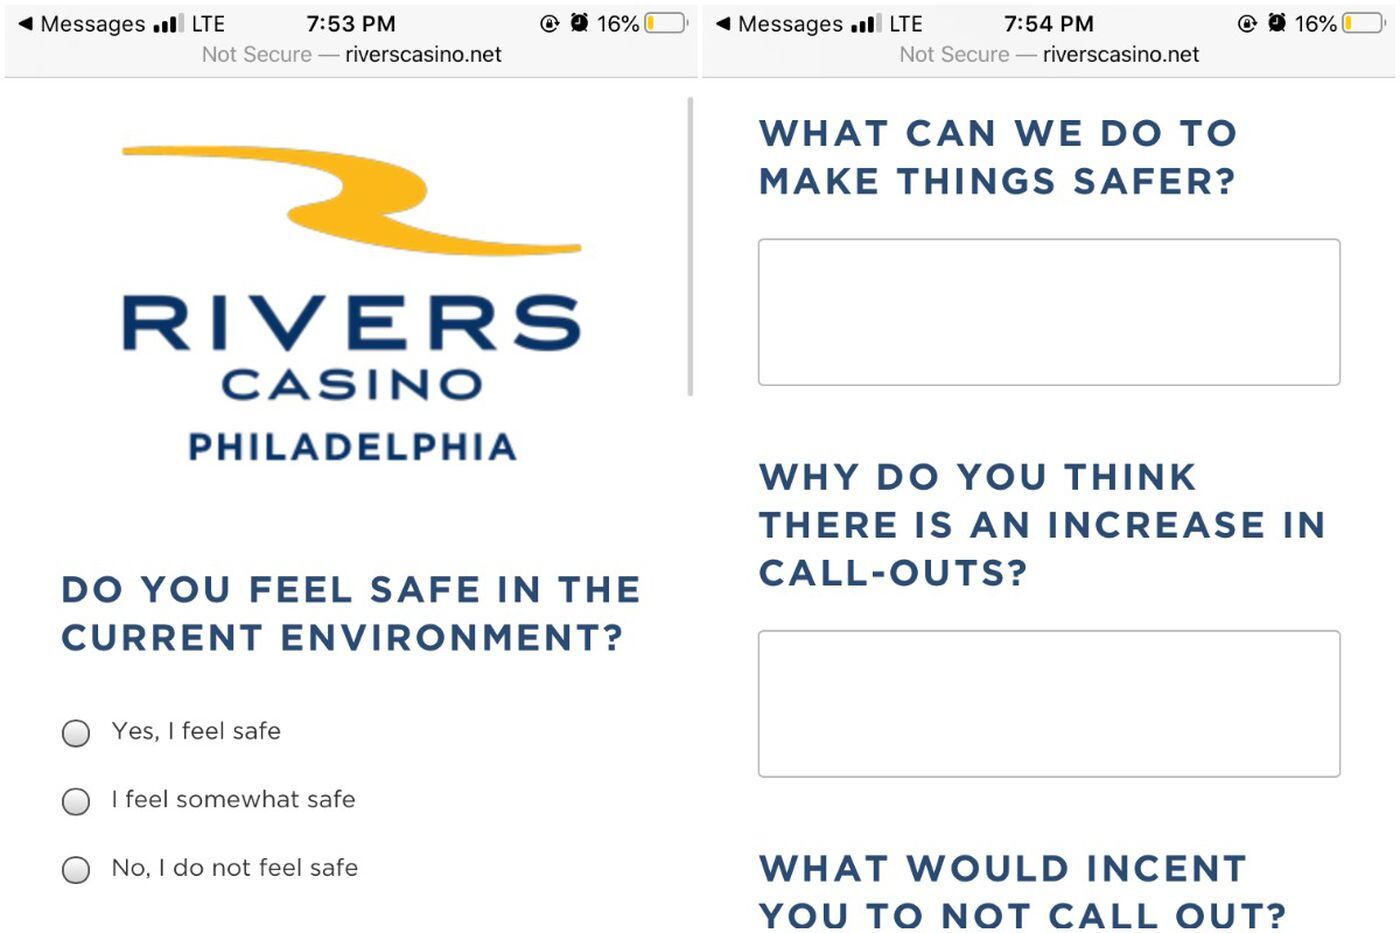 Workers At Rivers Casino Philadelphia Complain Of Coronavirus Secrecy And Lax Safety